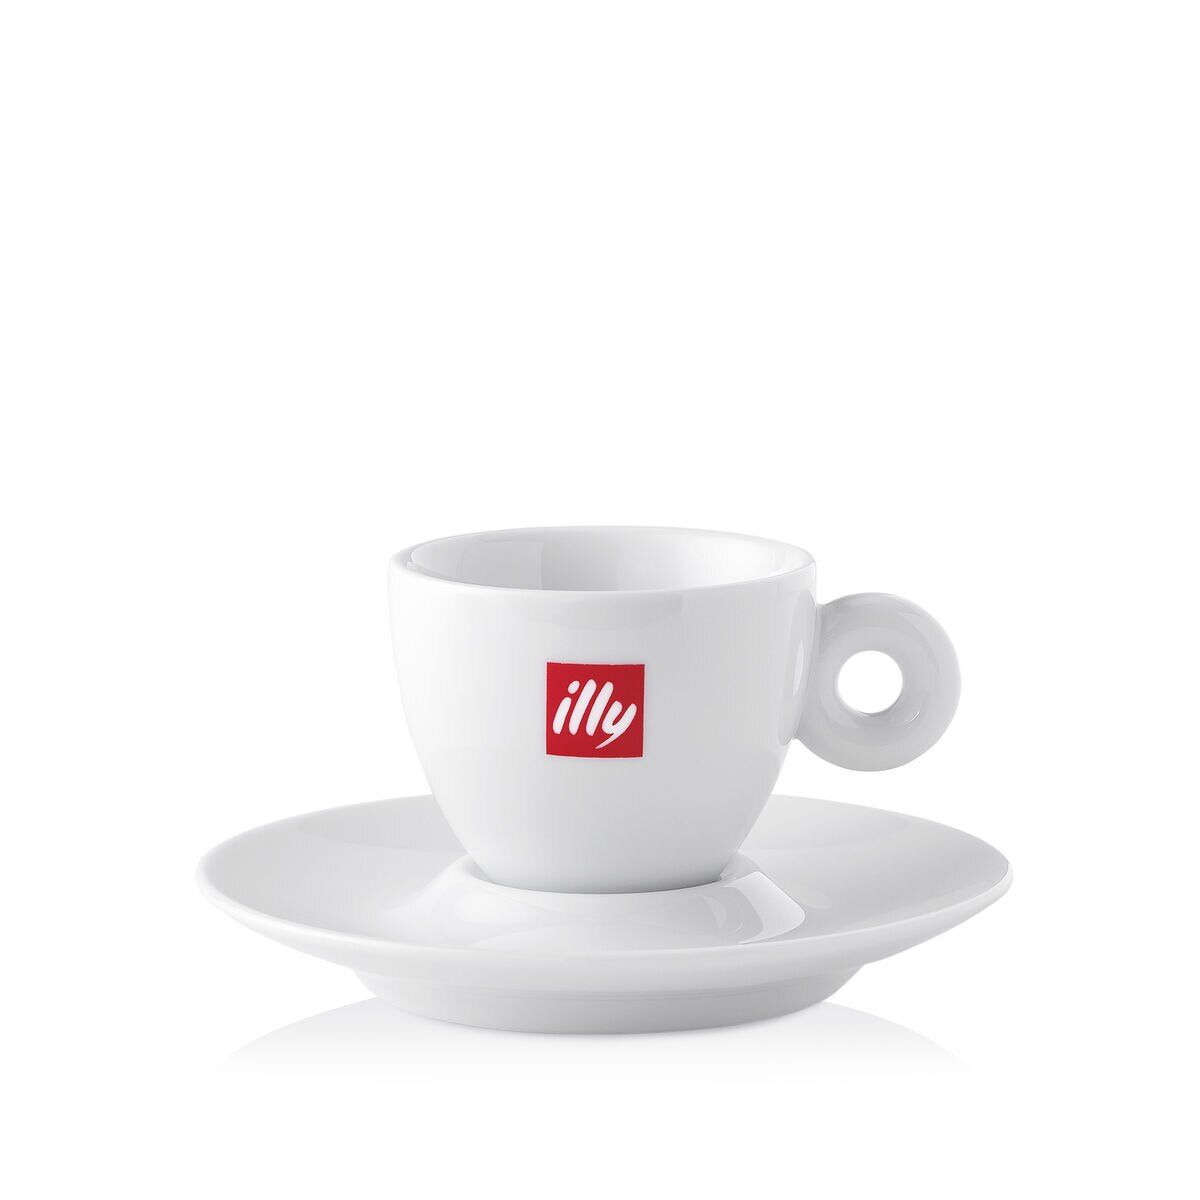 illy Trio of Cups Gift Set - One Espresso Cup, One Cappuccino Cup & One Mug - cup